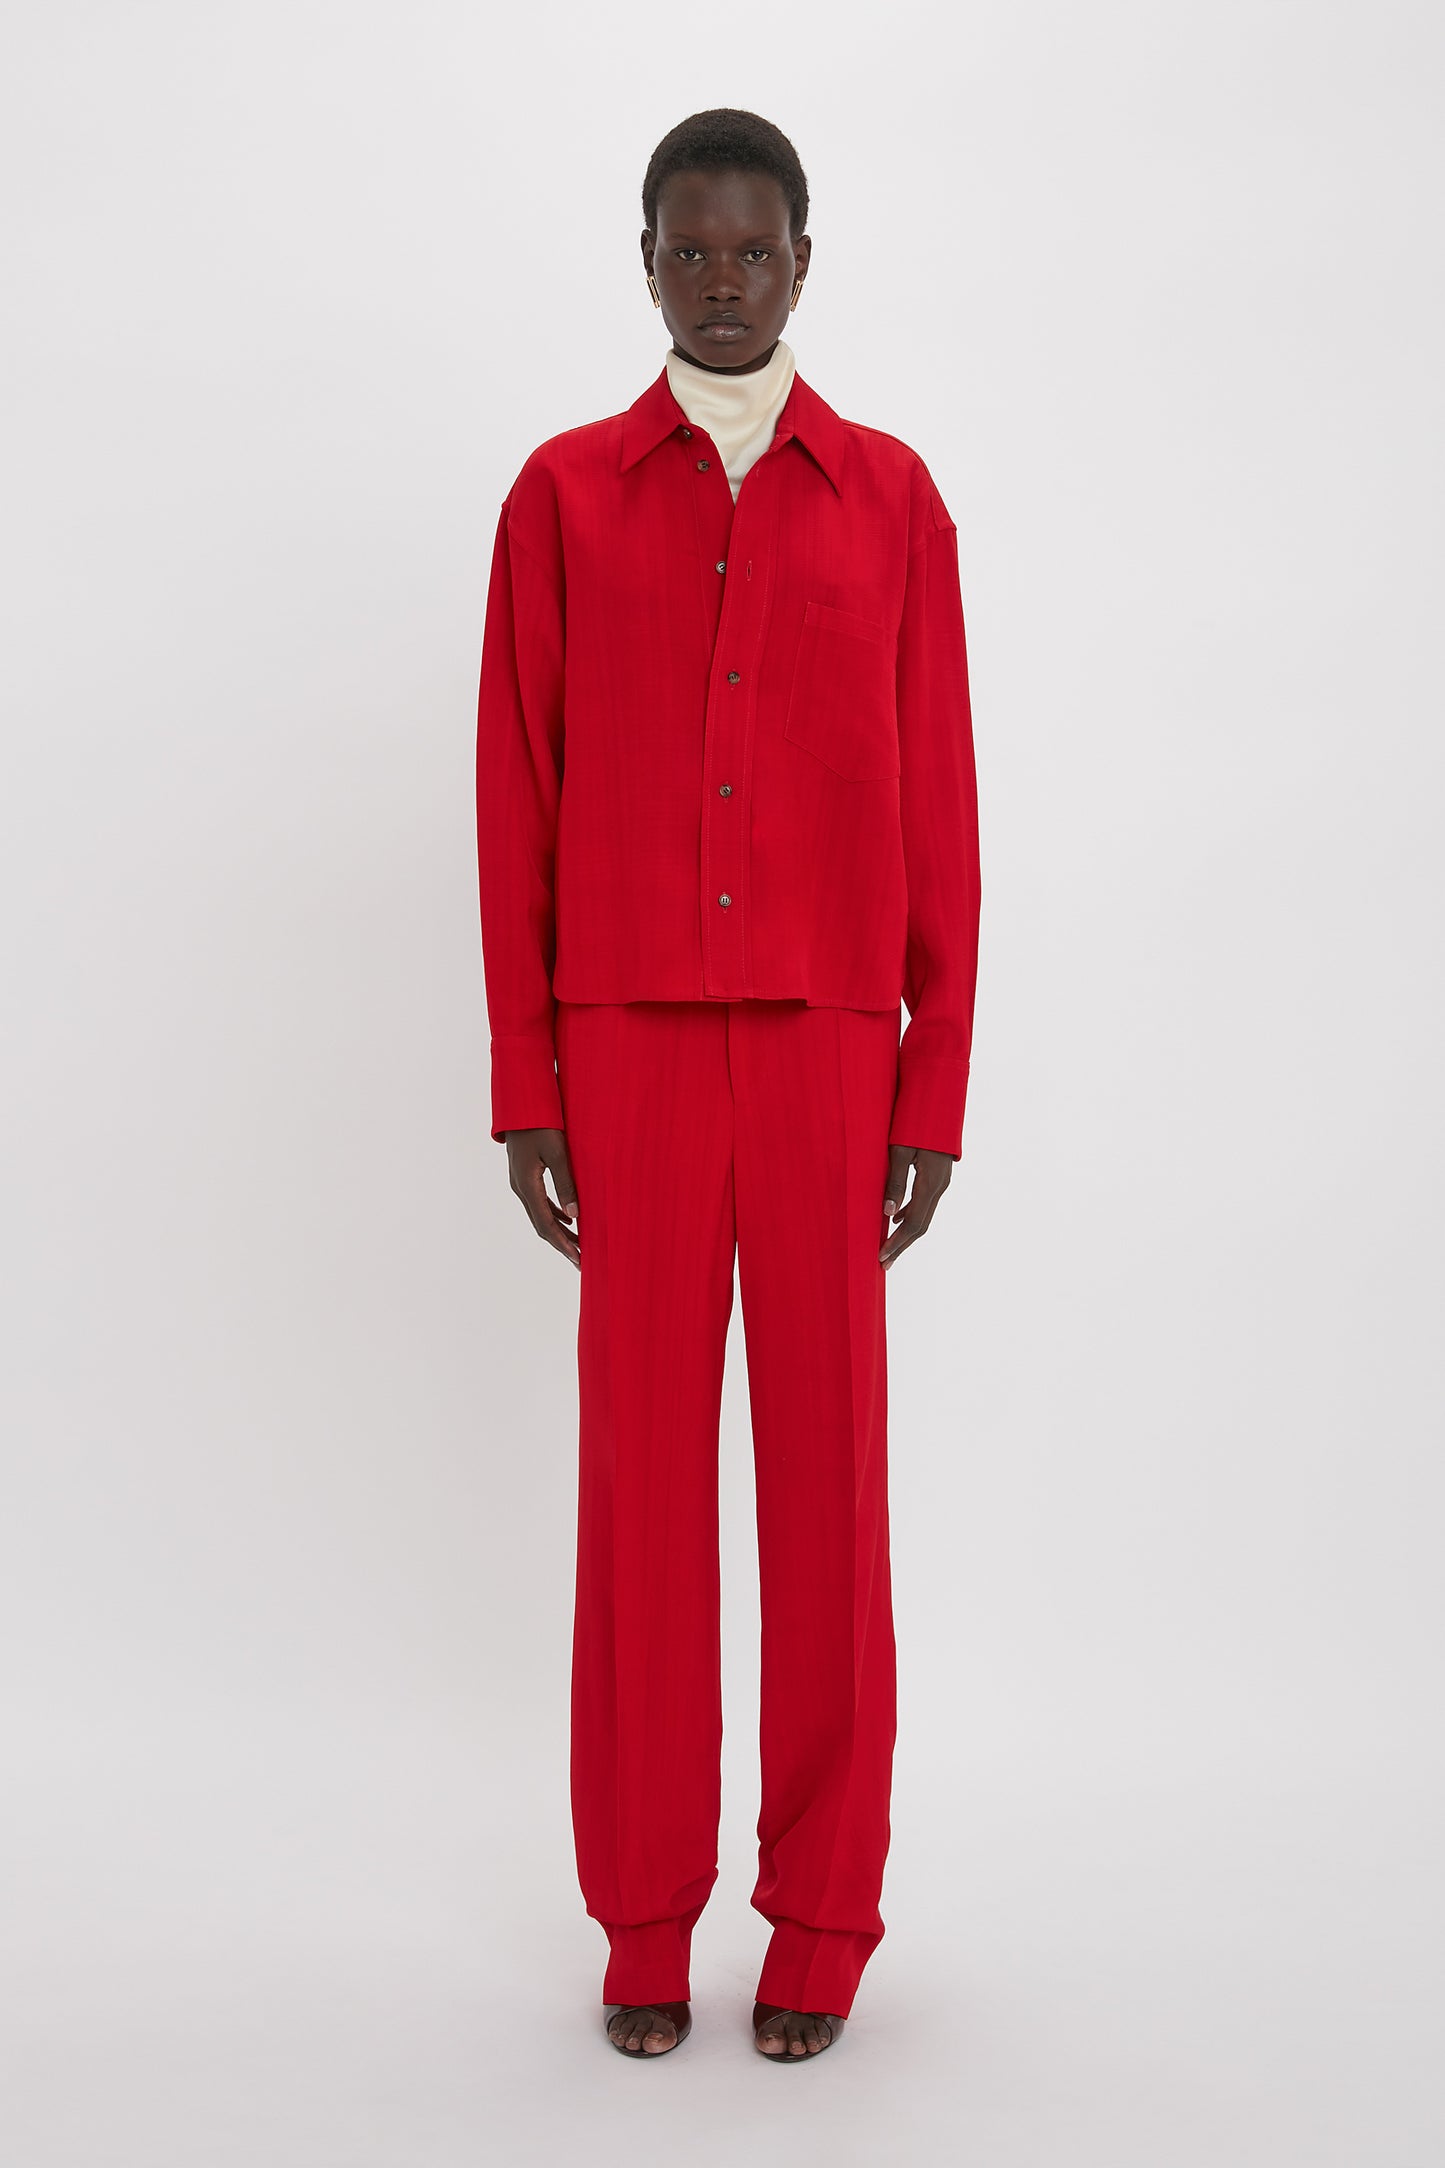 A person stands facing forward, wearing a red Cropped Long Sleeve Shirt In Carmine by Victoria Beckham with a masculine-inspired design, paired with matching red pants and a white turtleneck underneath.